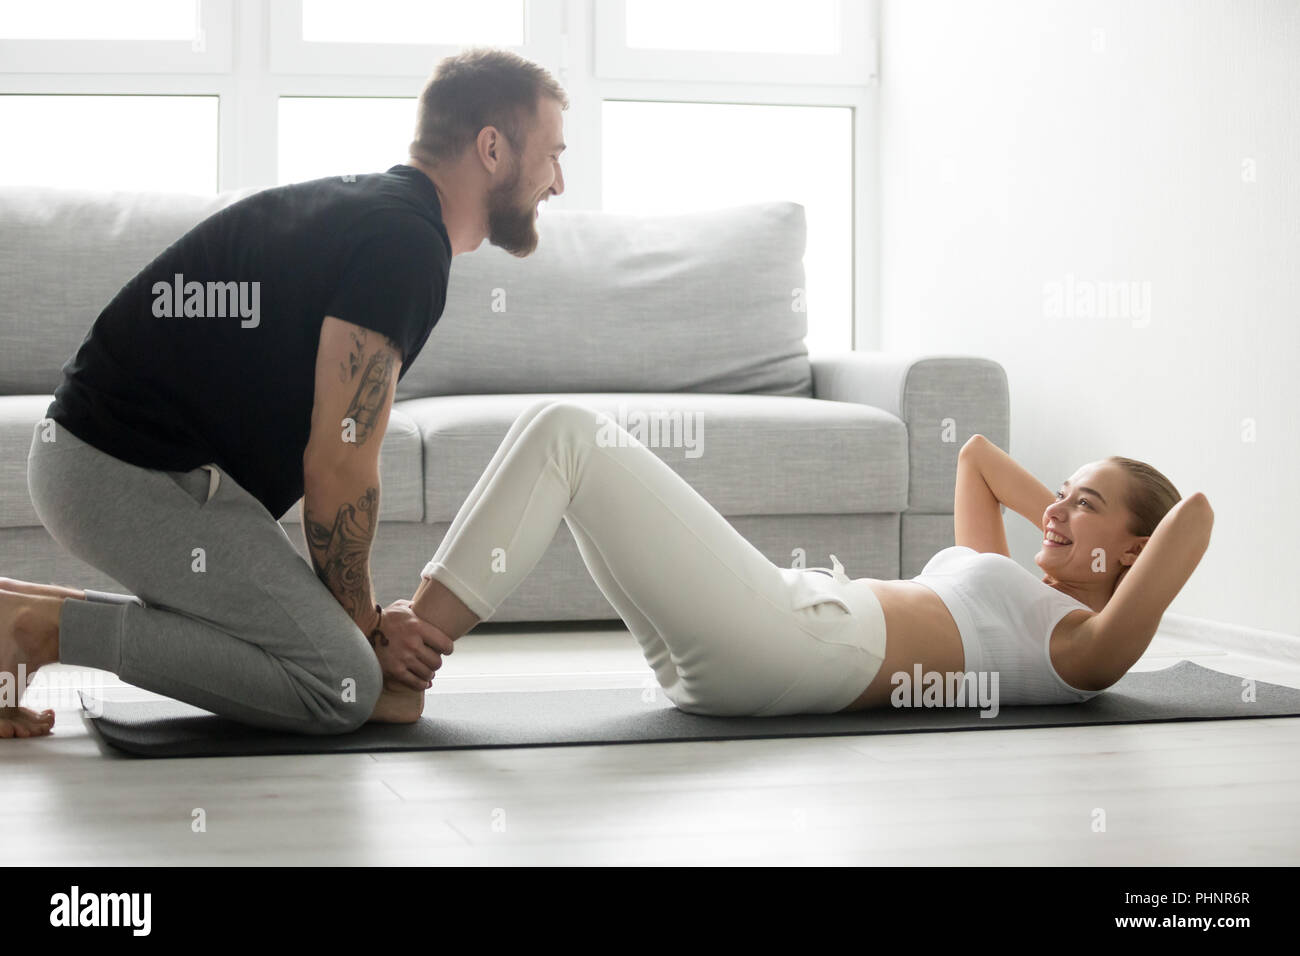 Toned woman do abs exercises supported and motivated by boyfrien Stock Photo